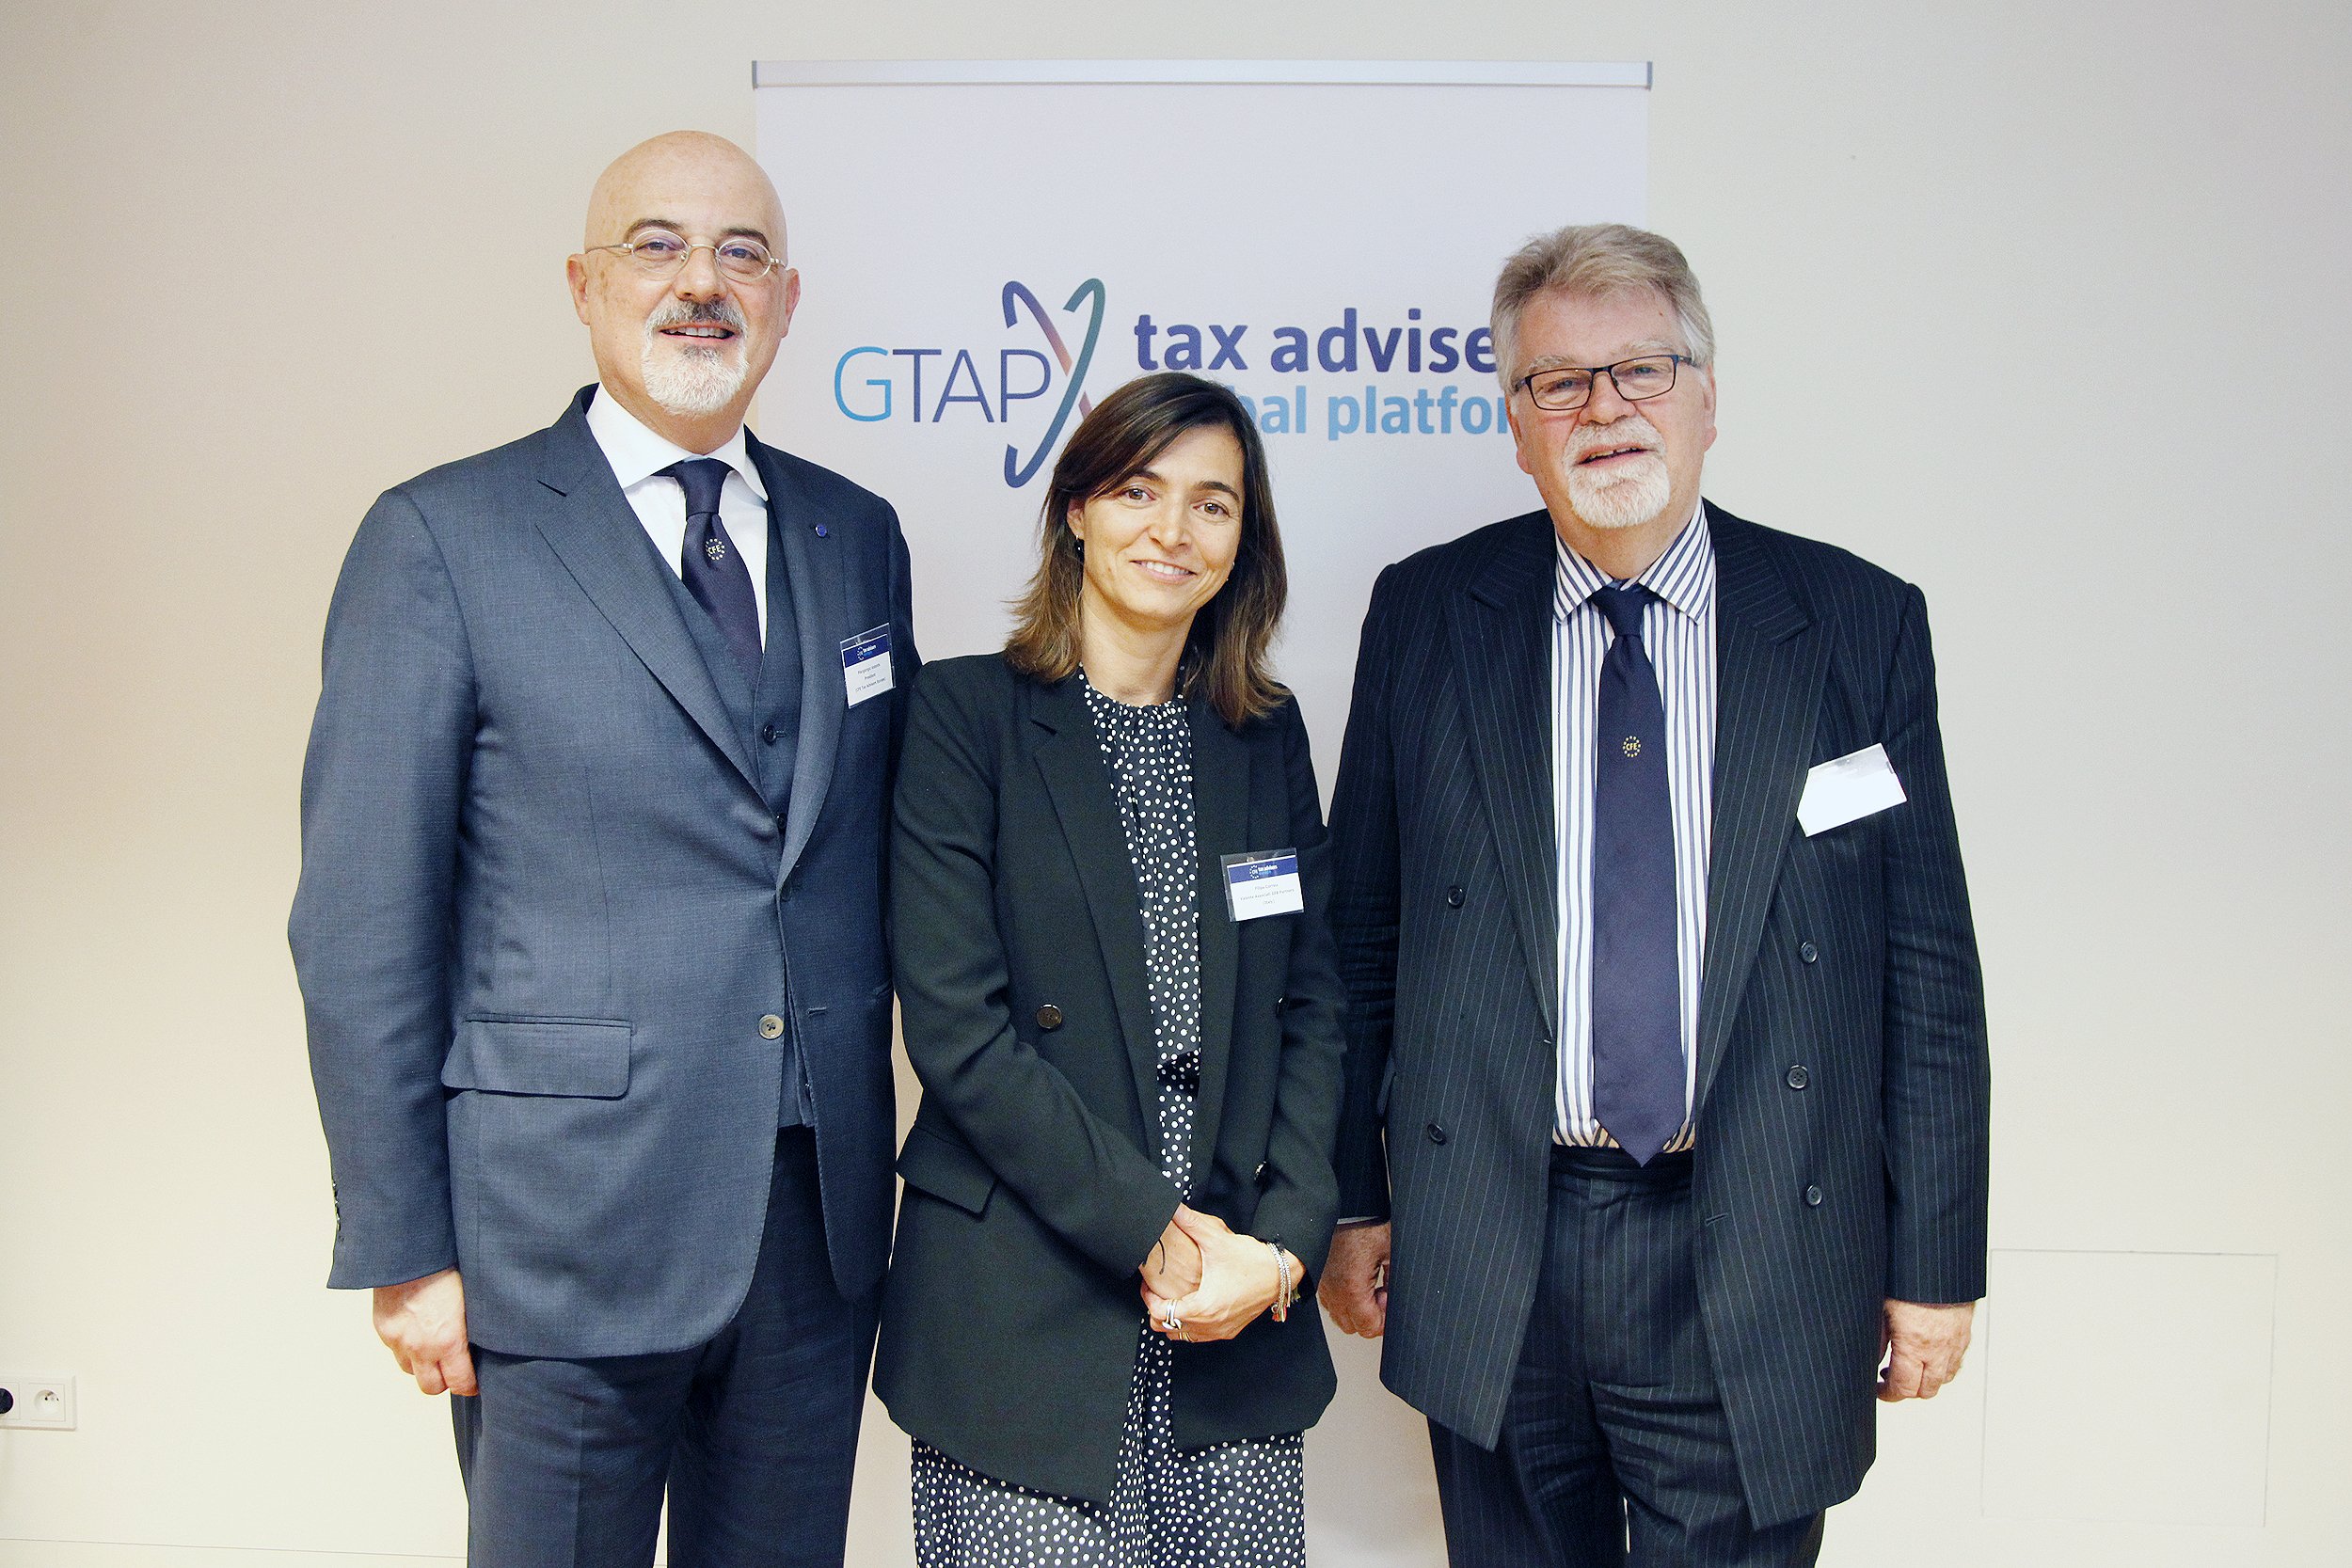 piergiorgio-valente-chairman-of-gtap-filipa-correia-and-ian-hayes-chair-of-the-cfe-tax-technology-committee_48084919917_o.jpg